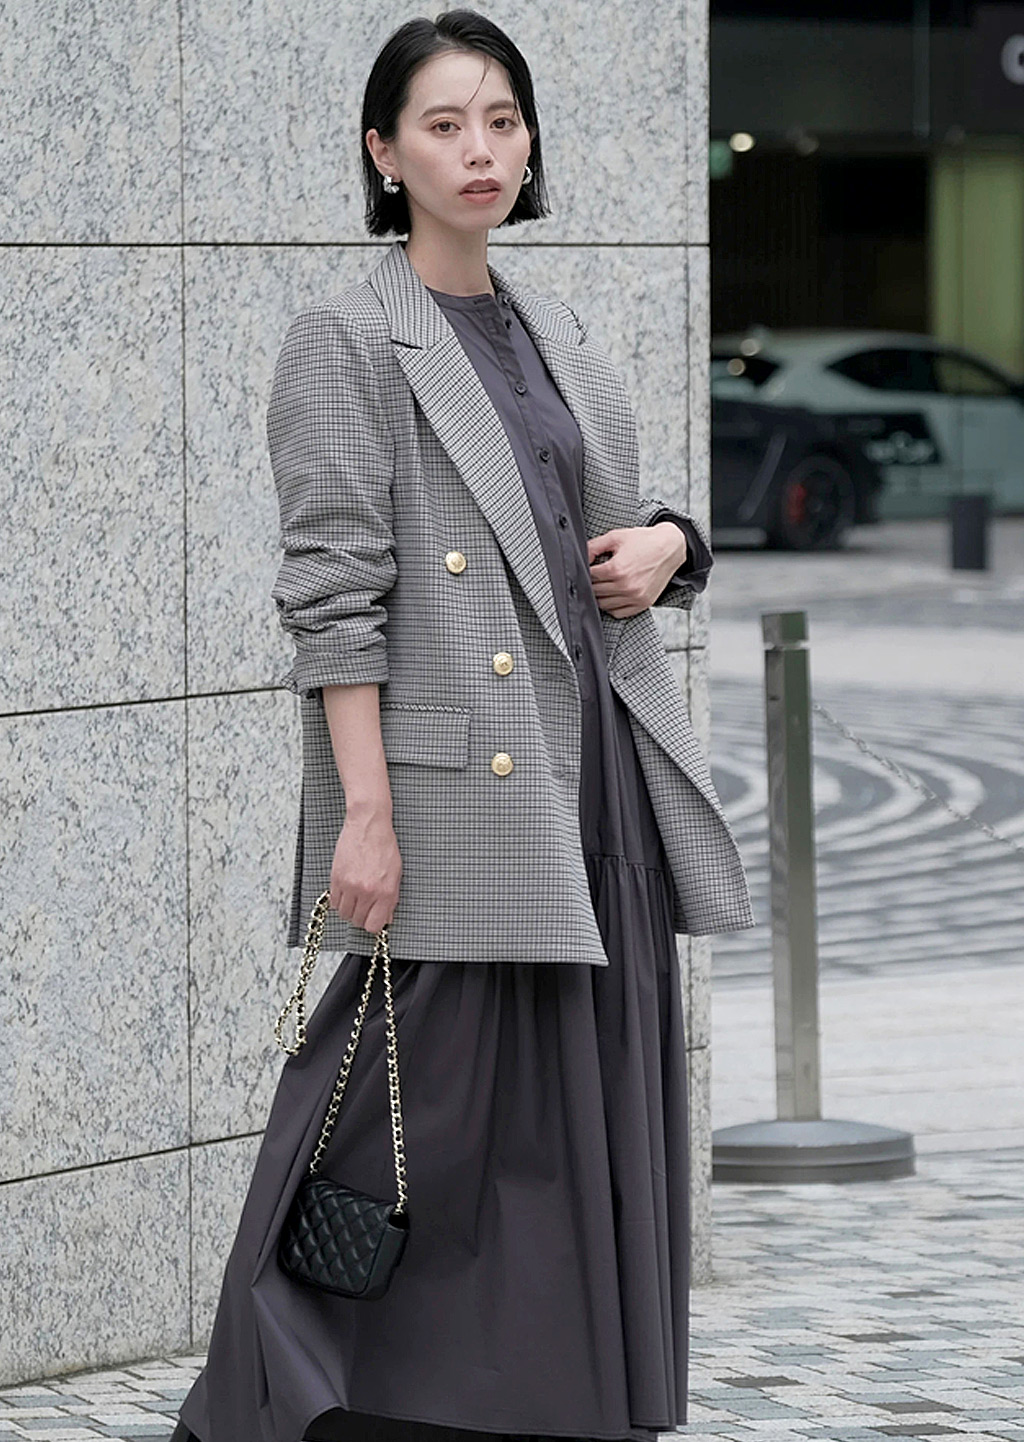 5 Tokyo Coat Trends You'll See Everywhere This Winter 2022/2023